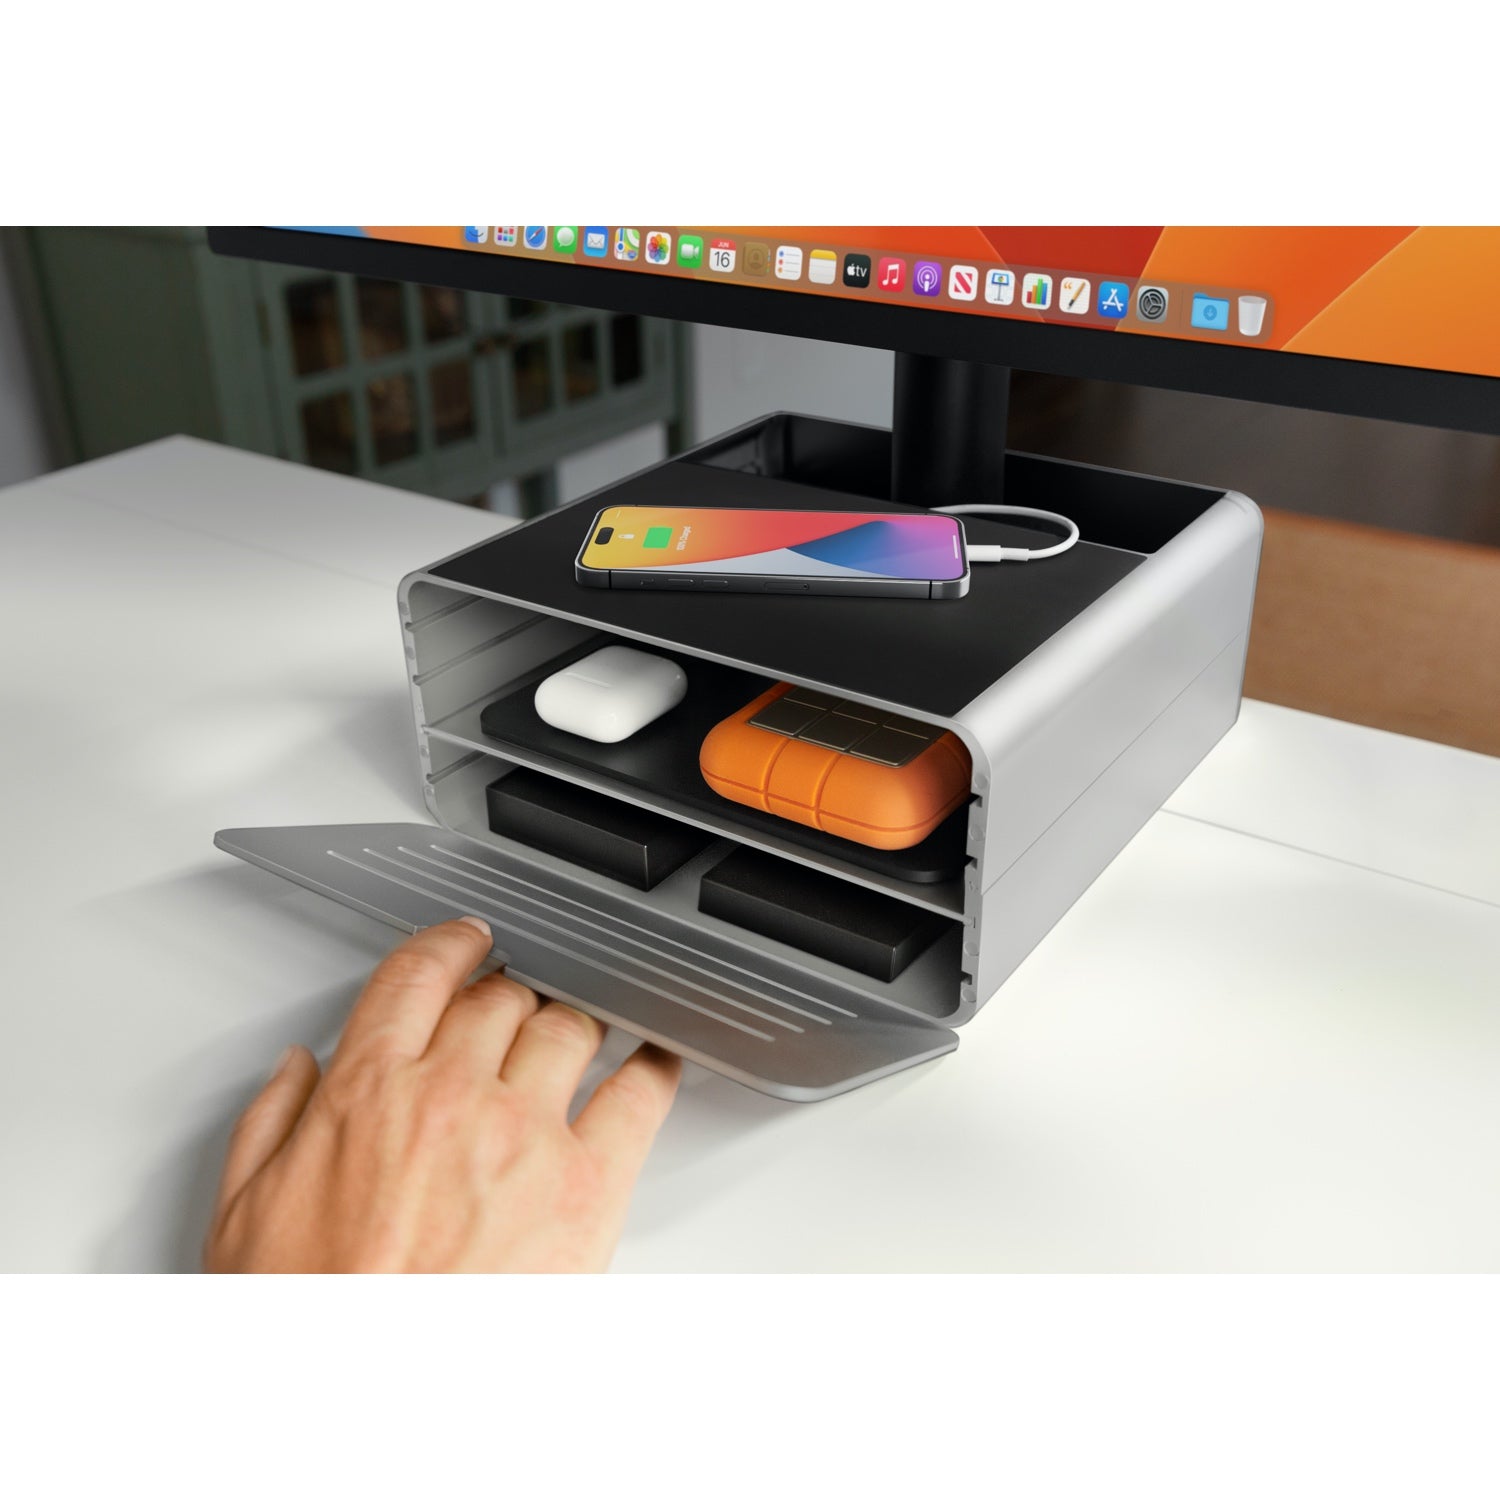 HiRise Pro for iMac and Display - Silver